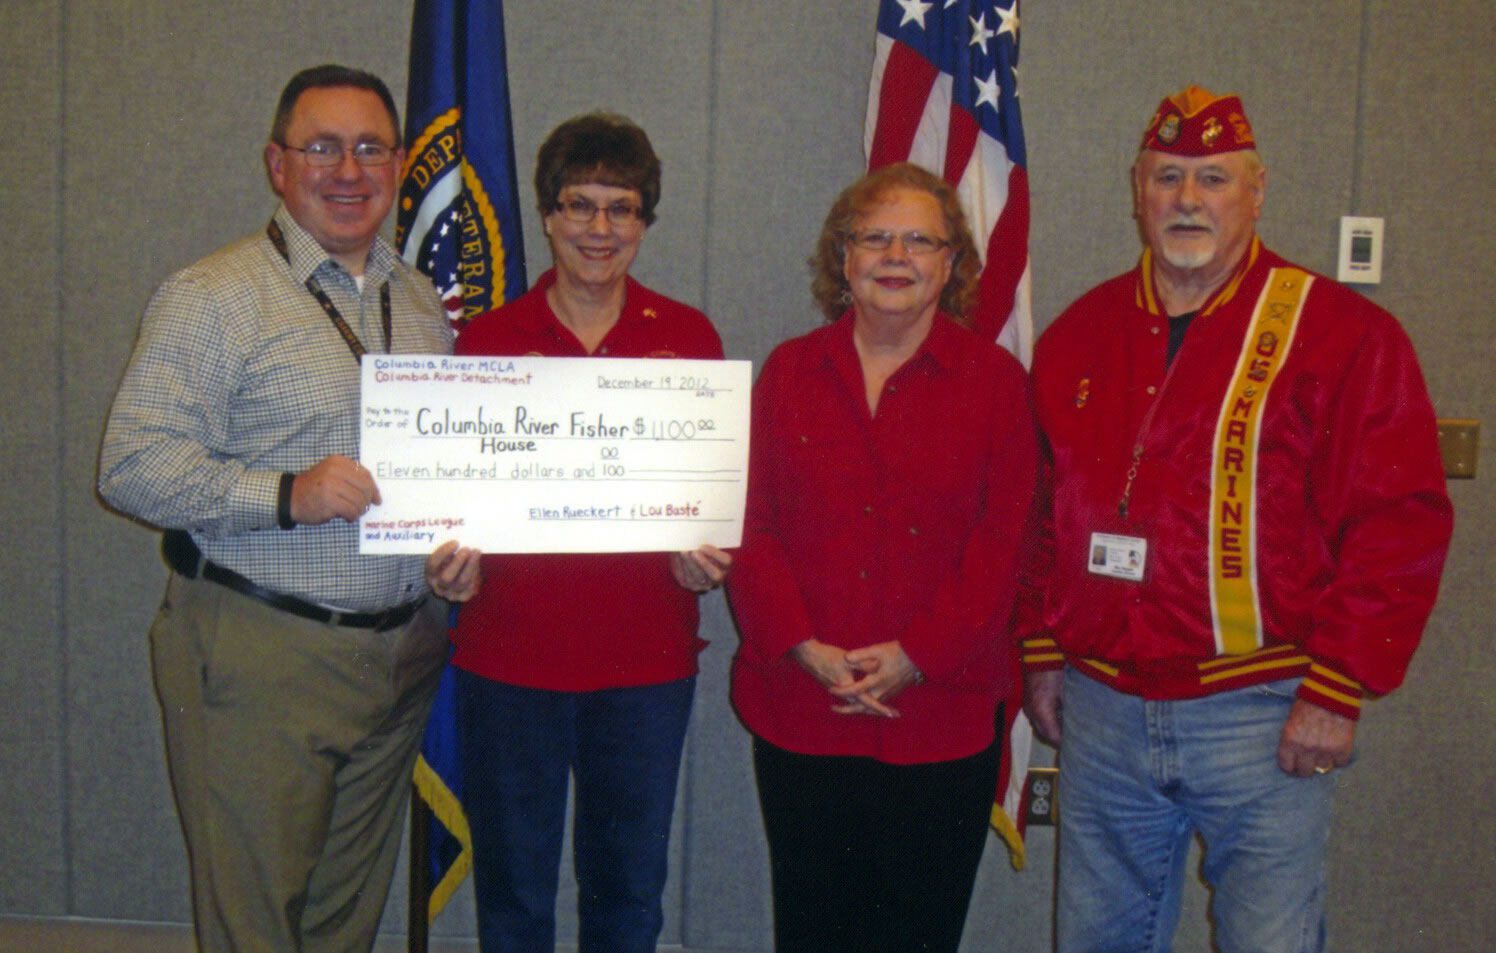 Central Park: Shaun Benson, from left, chief of voluntary service at the Portland Veterans Affairs Medical Center, accepts a Fisher House donation of $1,100 from Ellen Rueckert and Karen Baste' of the Columbia River Marine Corps League Auxiliary No. 398 and Rex Hopper of the Columbia River Marine Corps League Detachment No.